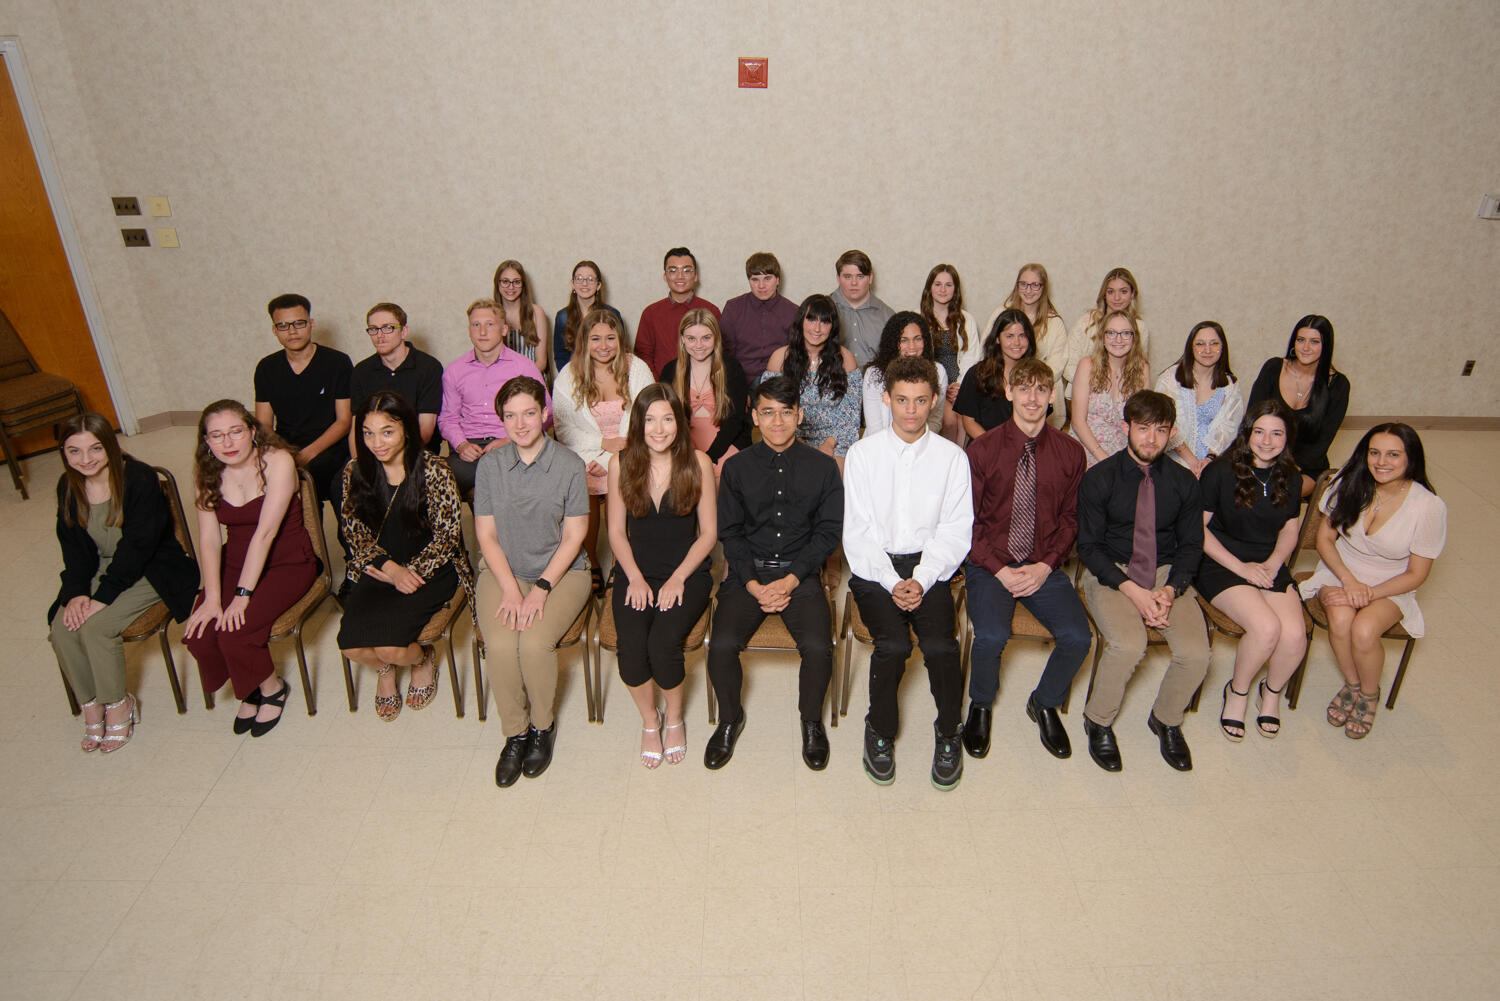 Steel Valley seniors awarded over $275,000 in college scholarships from local organizations, businesses